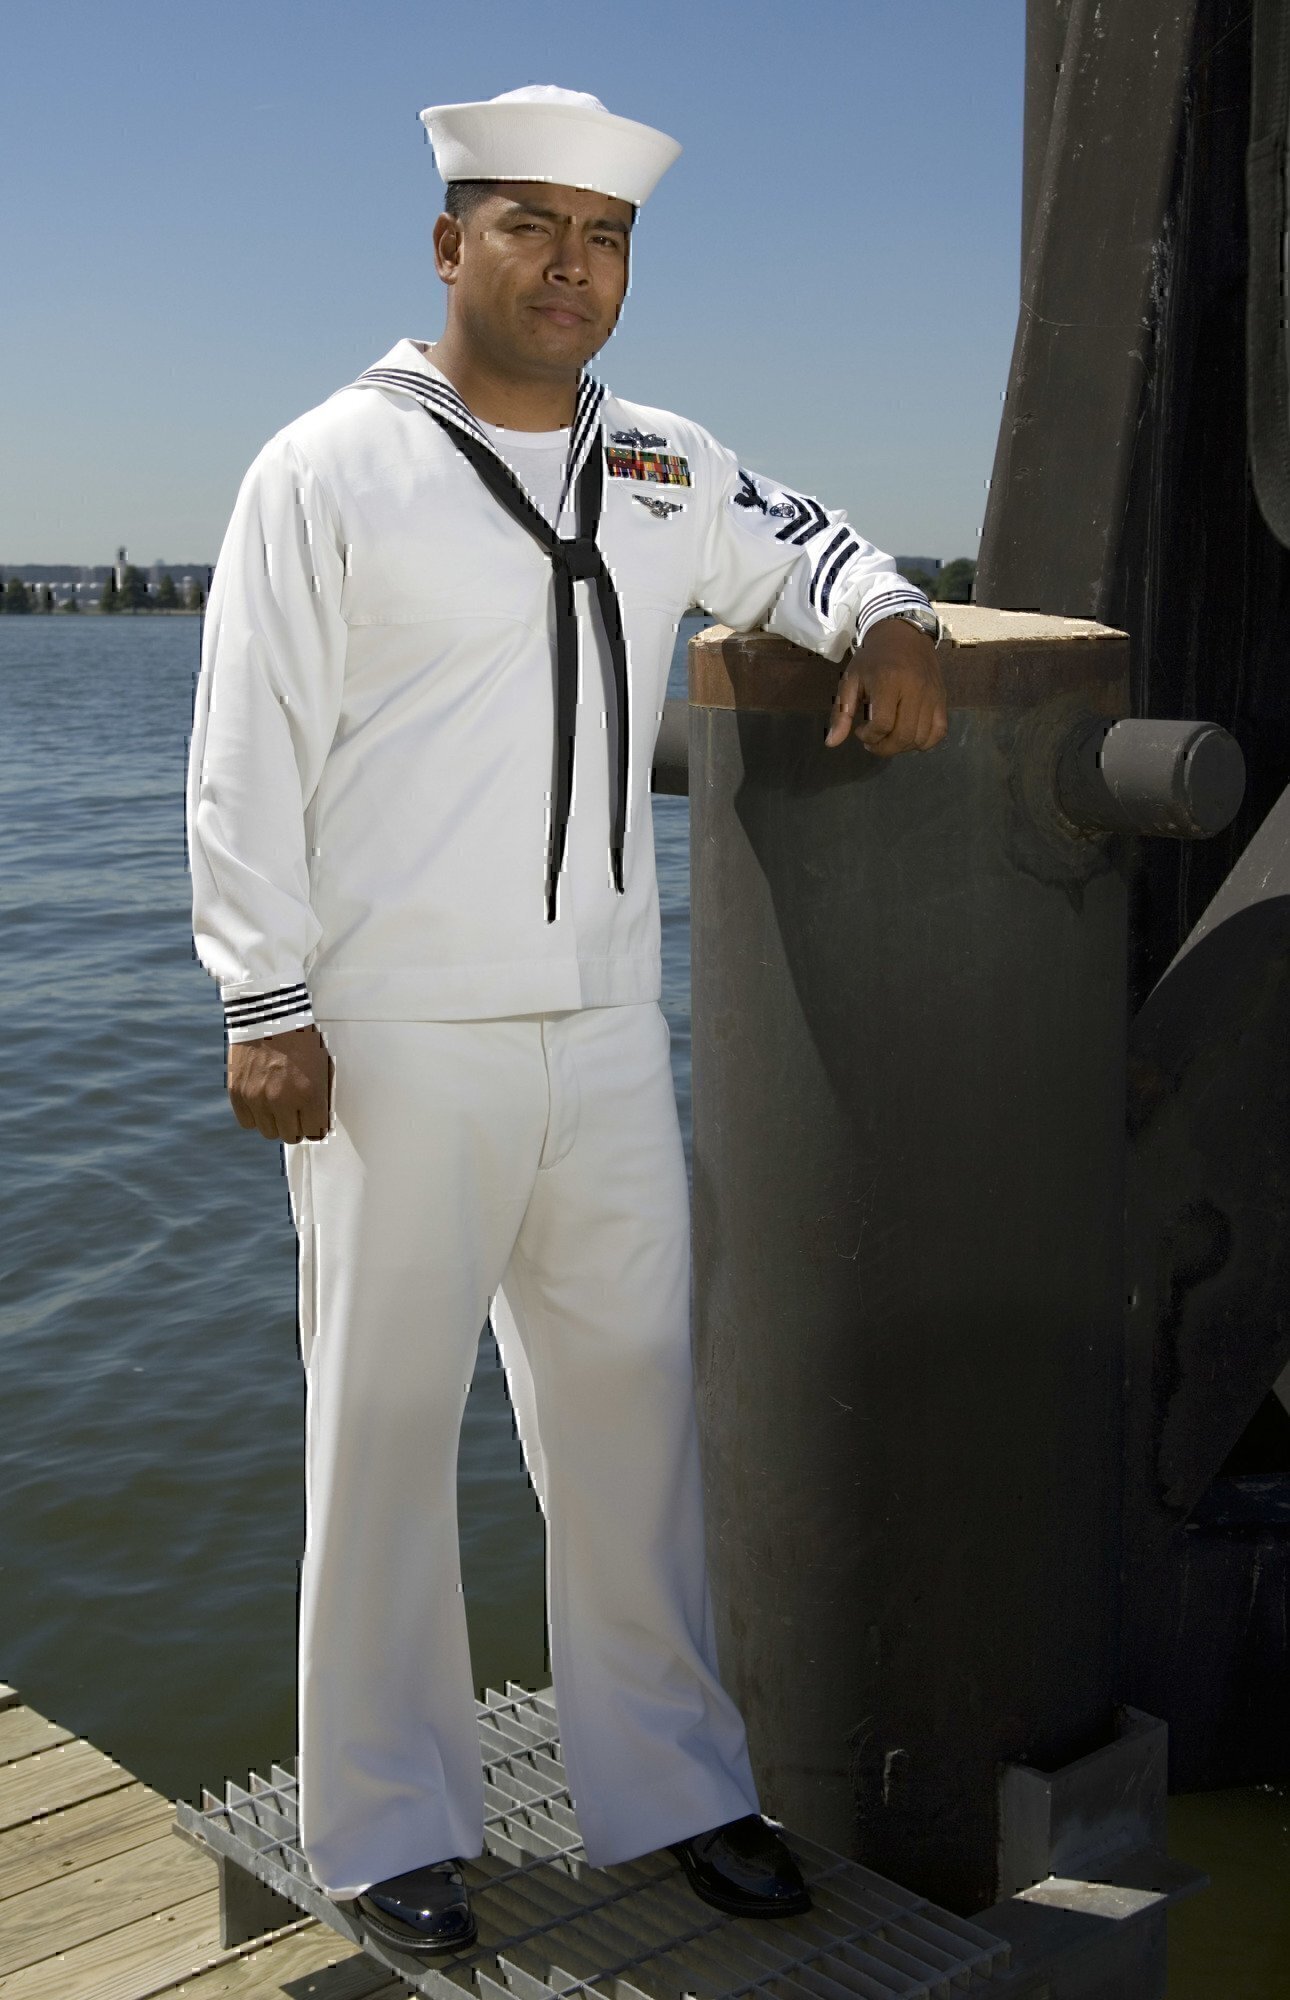 US Navy 070919 N 5319A 001 A Sailor Shows Off A Prototype Service Dress White Uniform That Focuses On Better Fabric And Fit Of The Uniform Without Drastically Changing The Look 